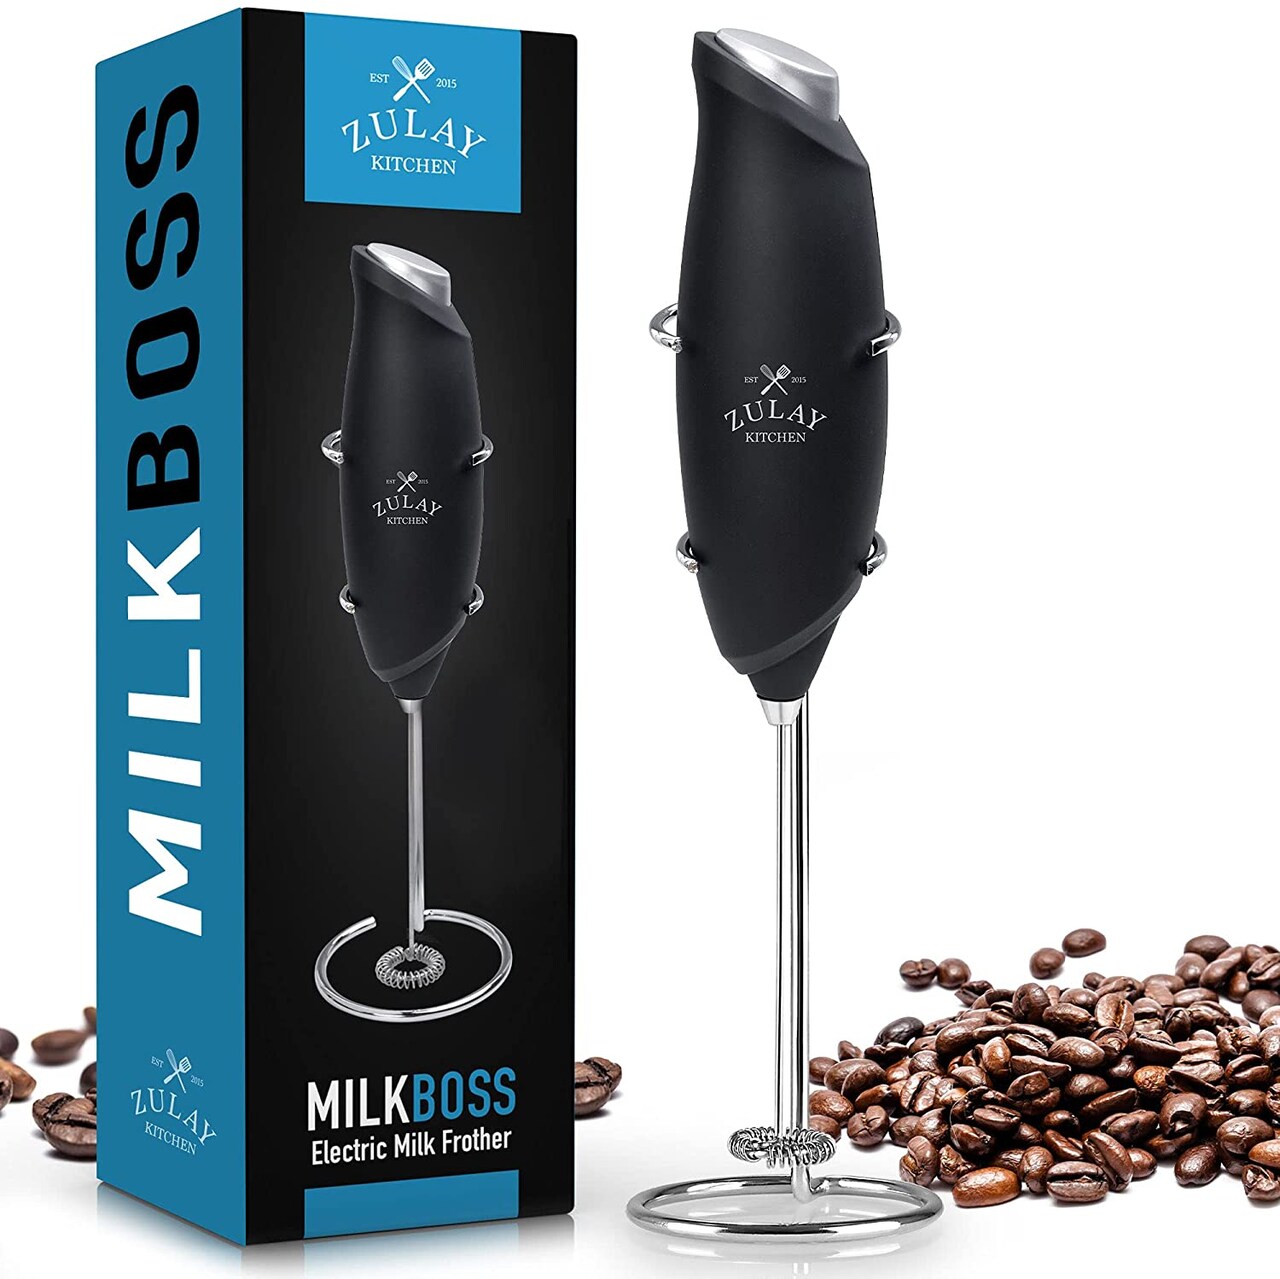 Zulay Milk Frother w/ Stand, 2020 One Touch - Black